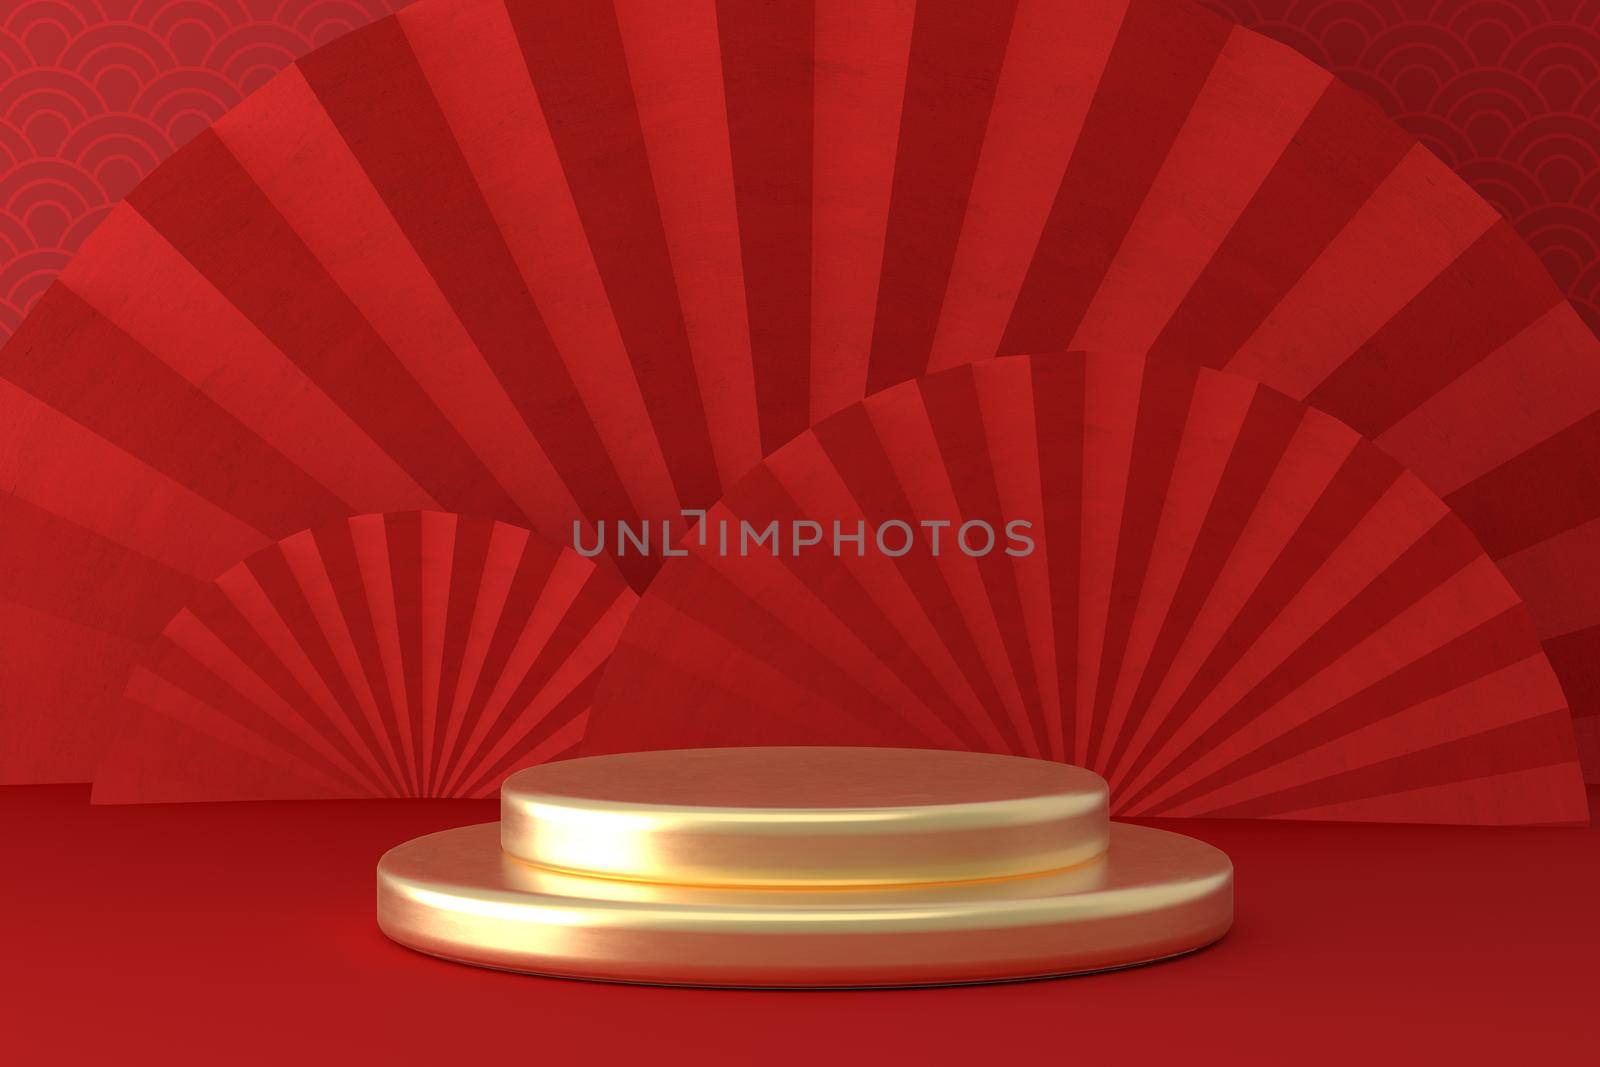 Chinese New Year style red one podium product showcase with gold circular shape with China fold fan and pattern scene background. Holiday traditional festival concept. 3D illustration rendering